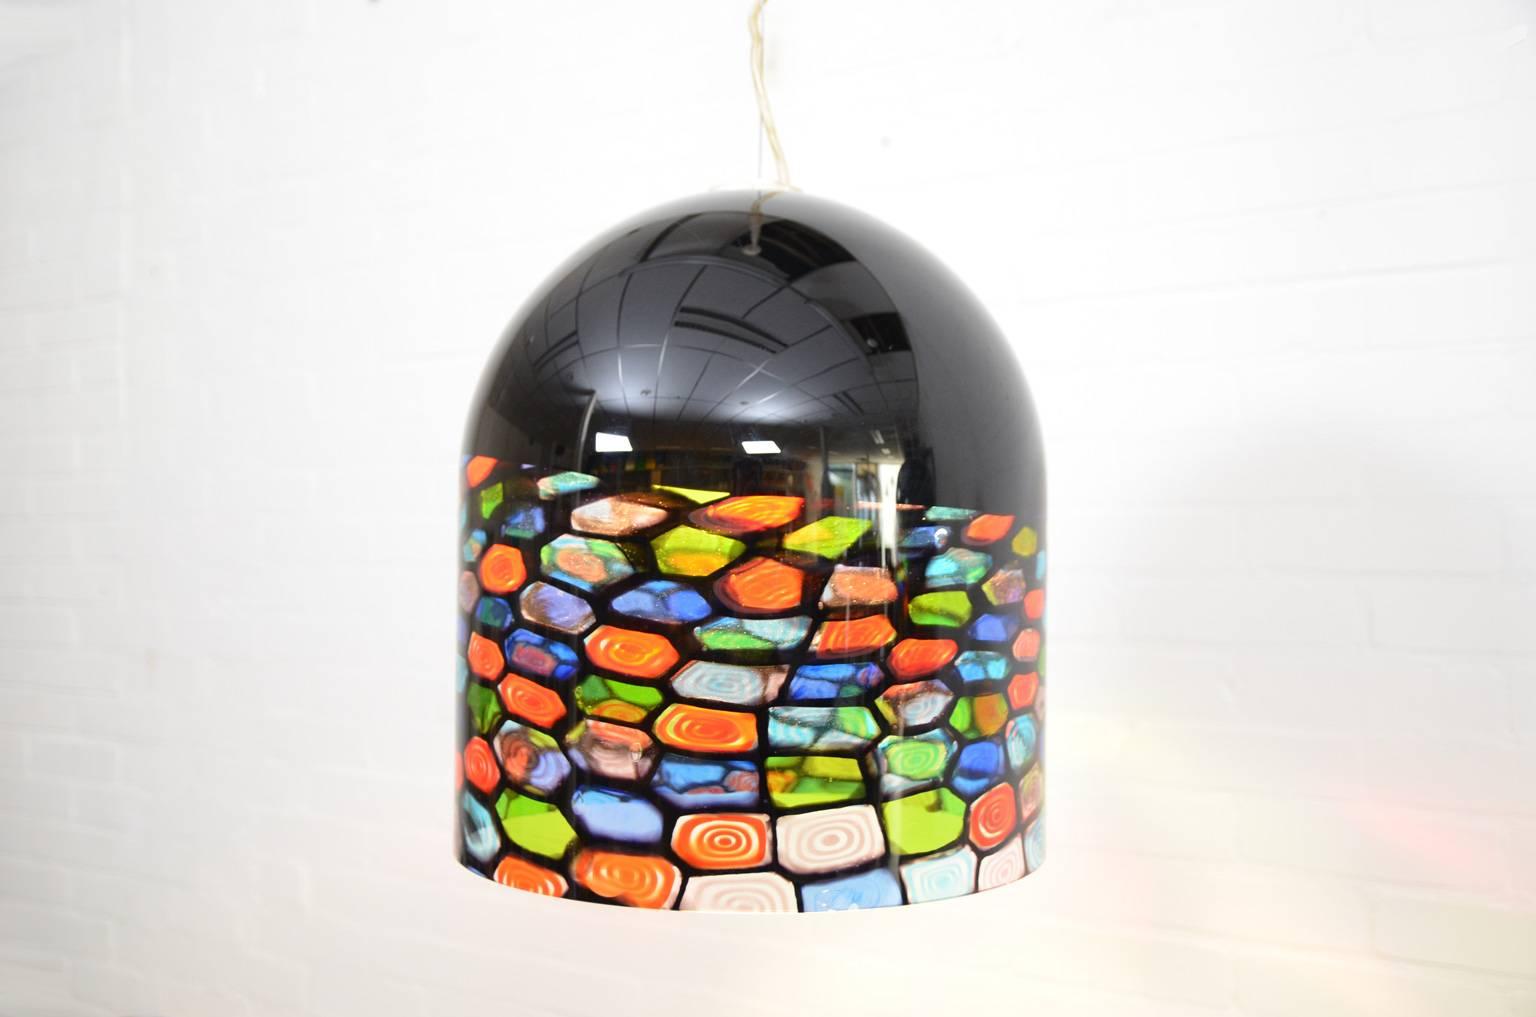 Renato Toso and Noti Massari - husband and wife - were responsible for the designs of the early Leucos lamps. In the 1970s they also designed this heavy and colorful lamp in glass. The cable length is adjustable. One of the lamps has a little chip,